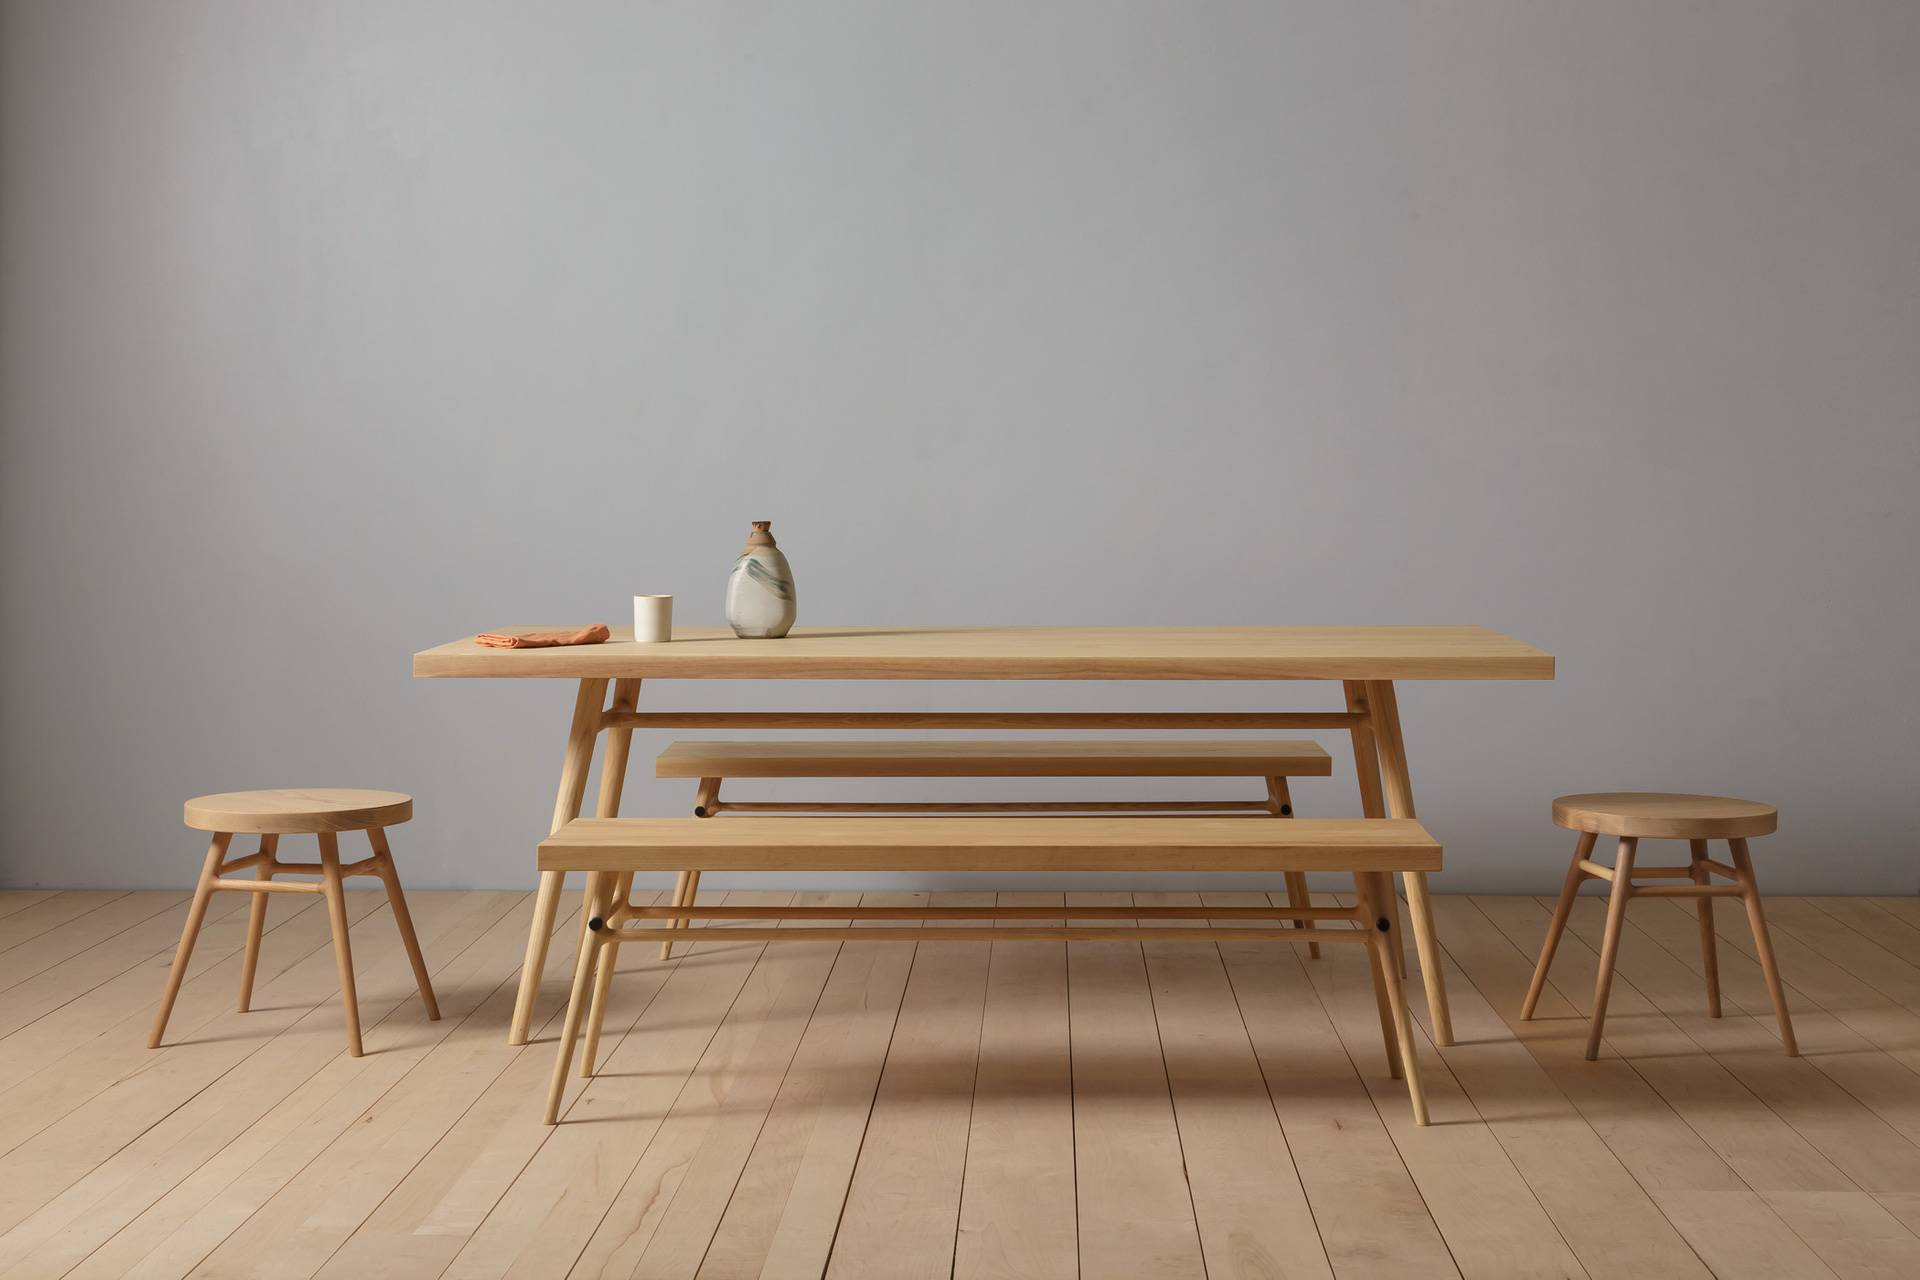 How To Build A Dining Table Bench